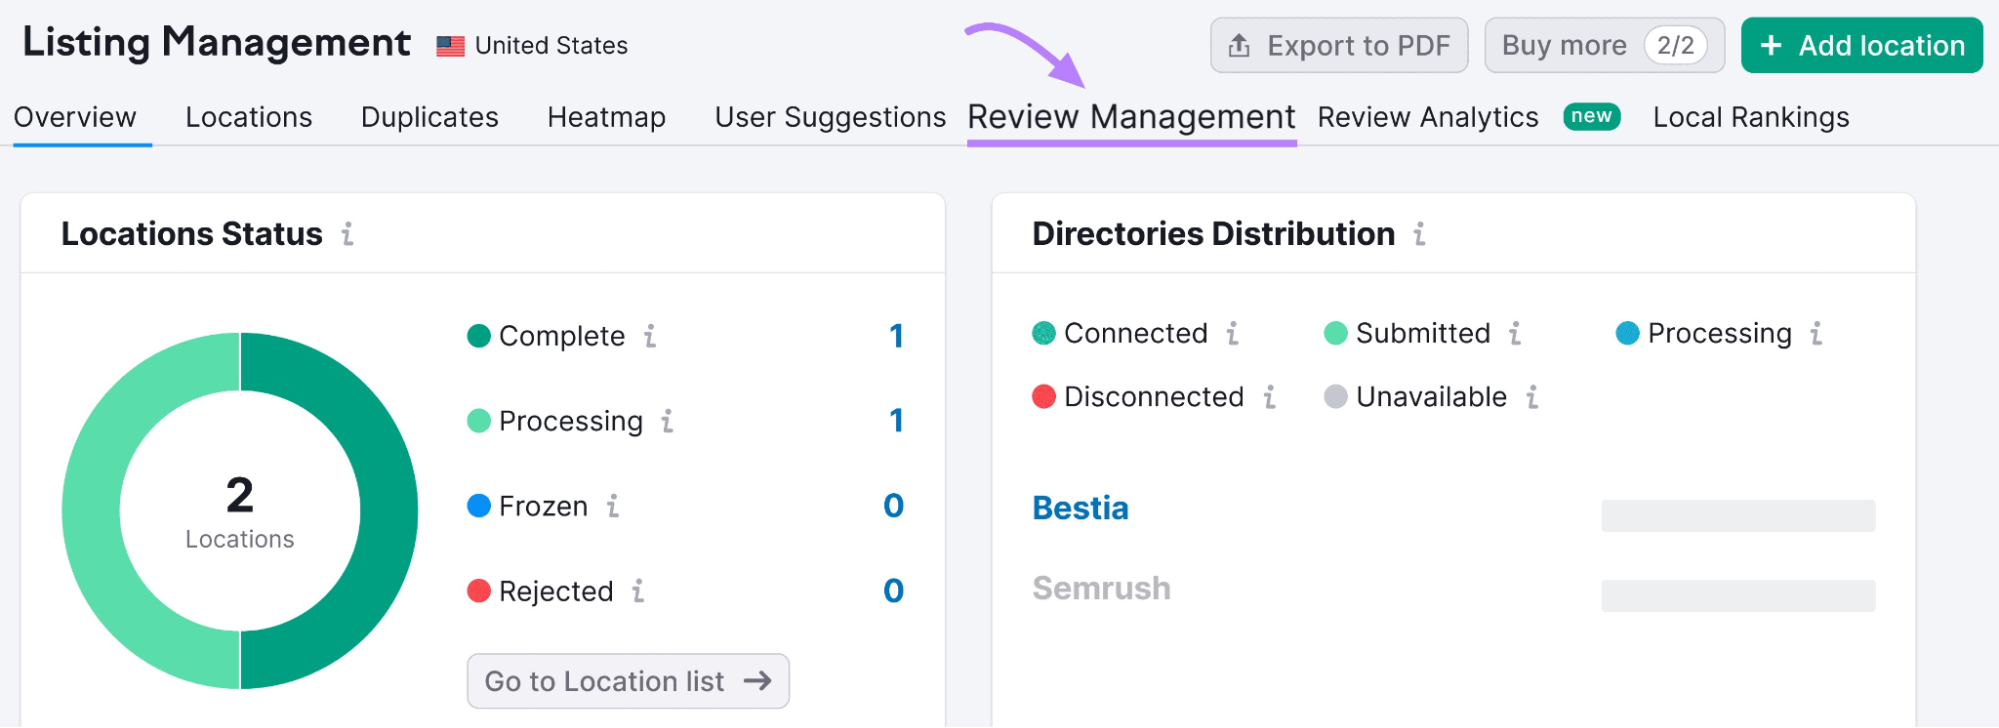 “Review Management” tab in Listing Management